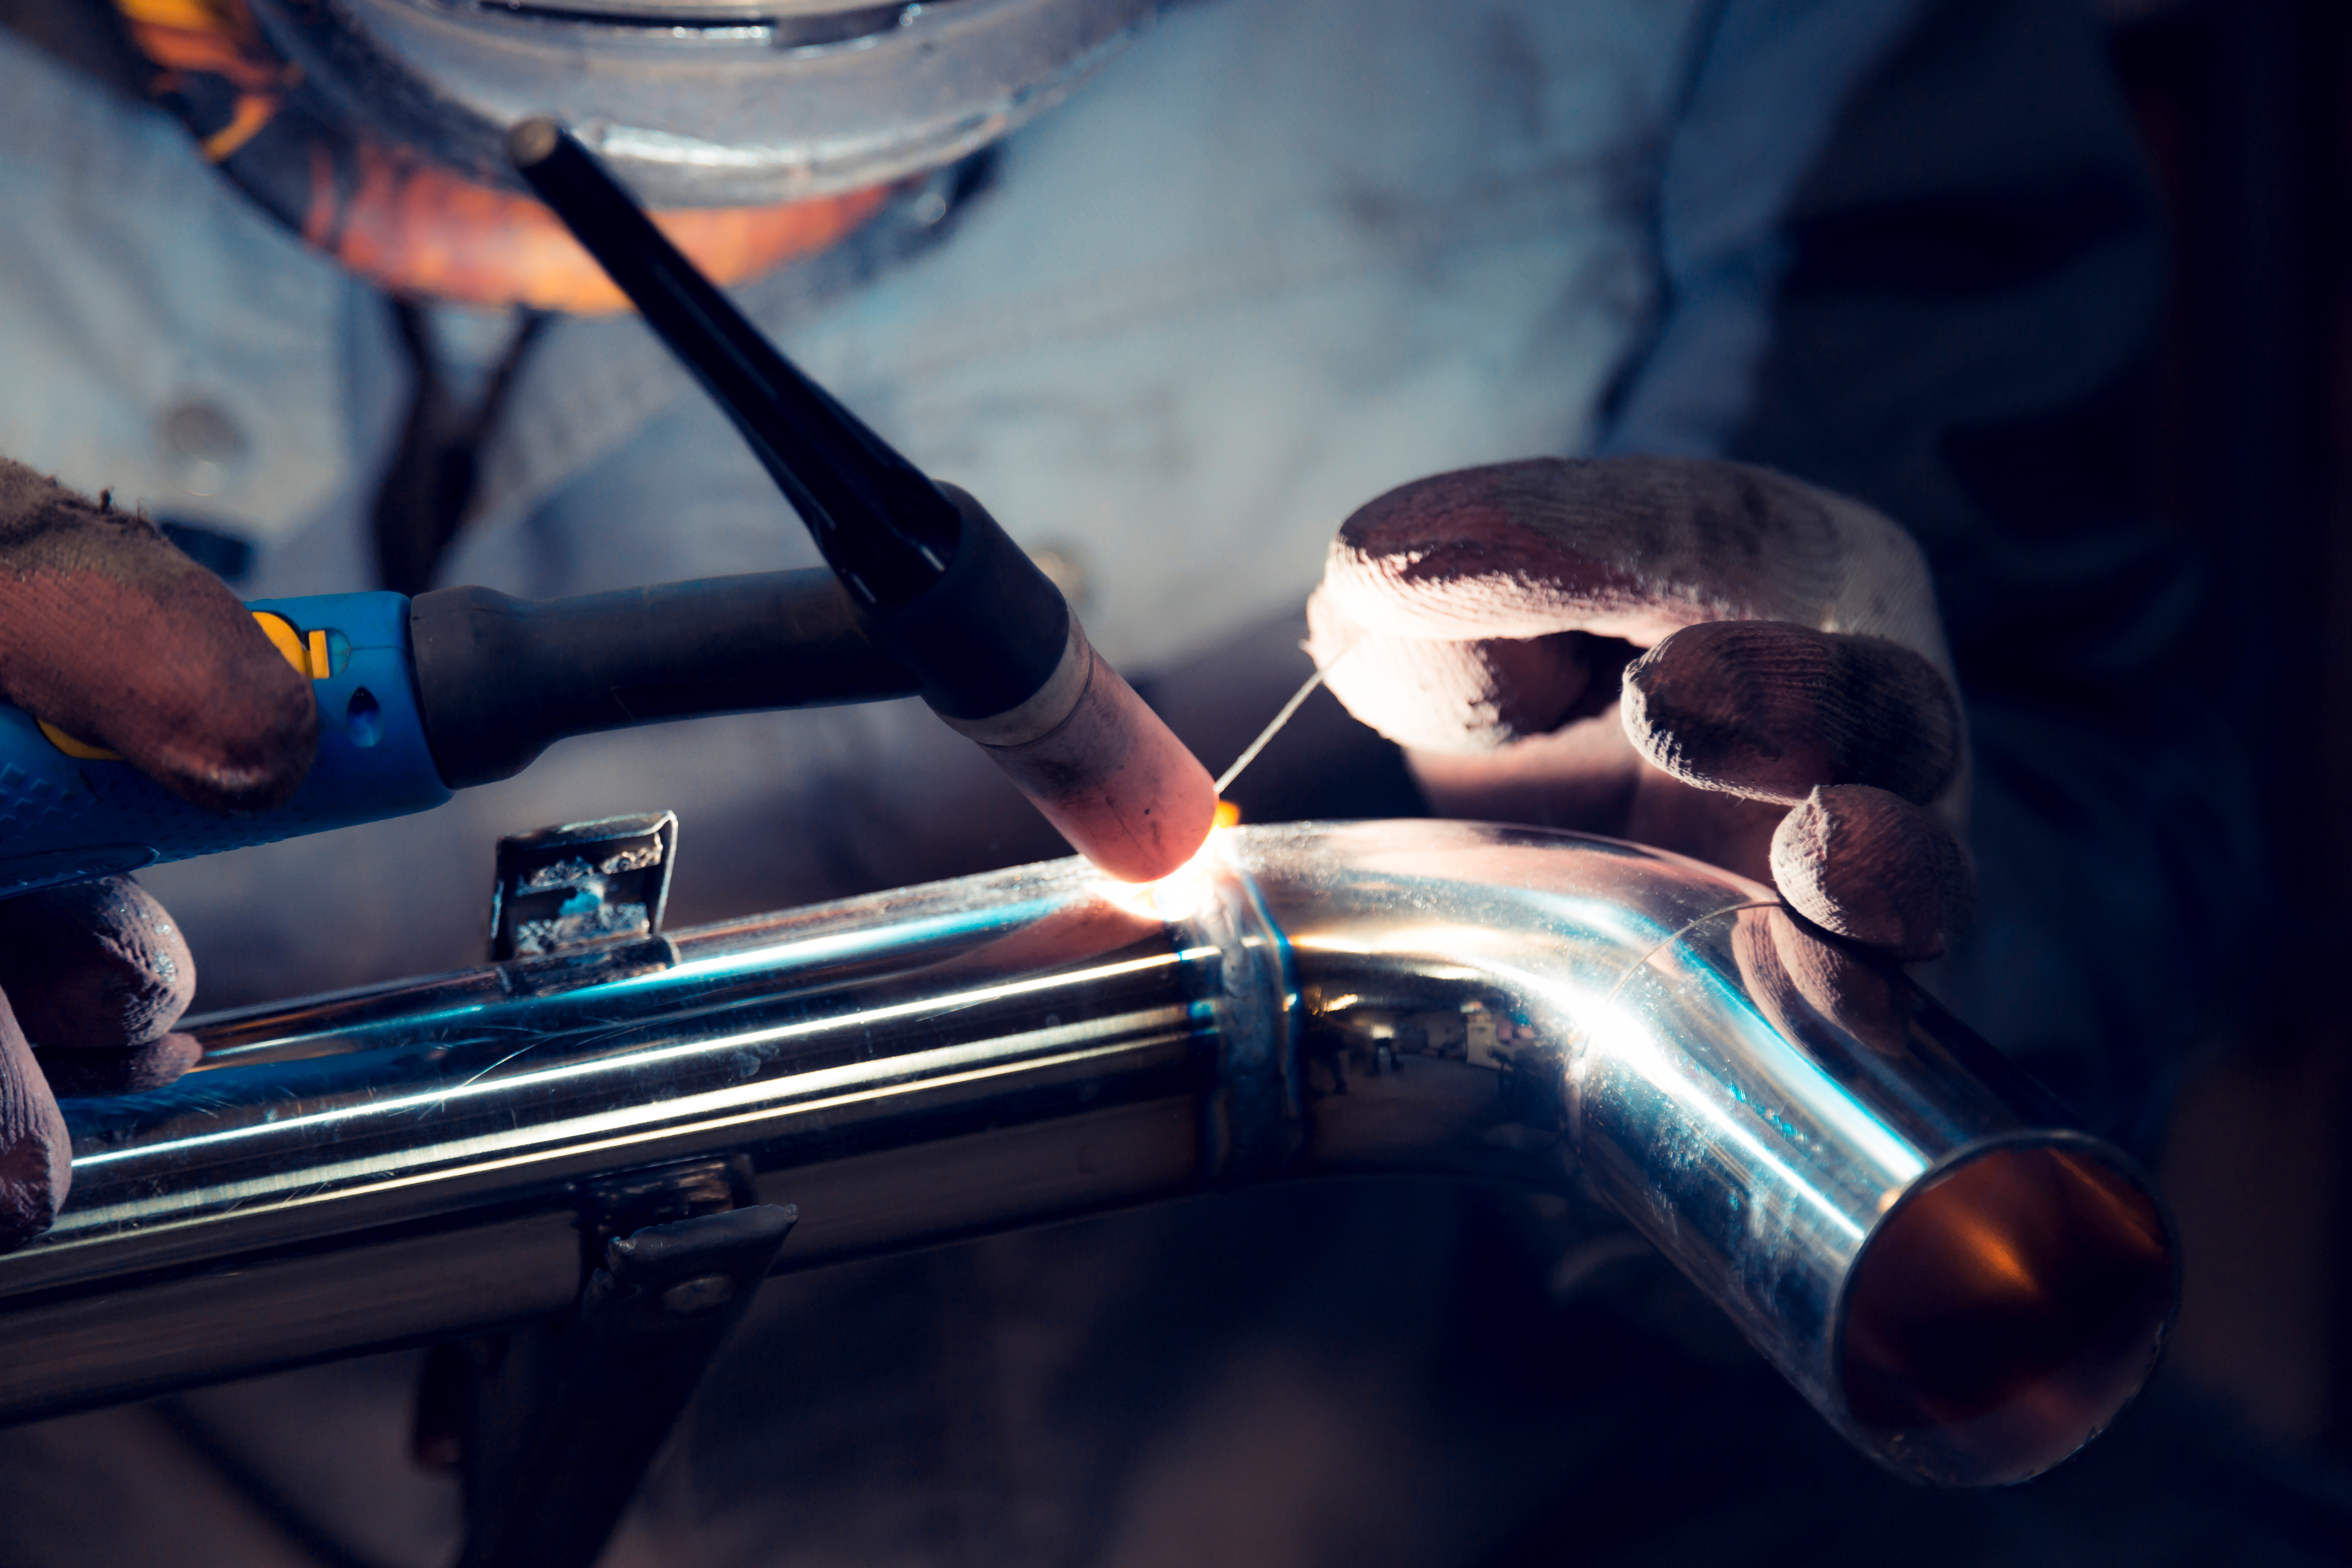 Welding is an application for pure gas flow meters.